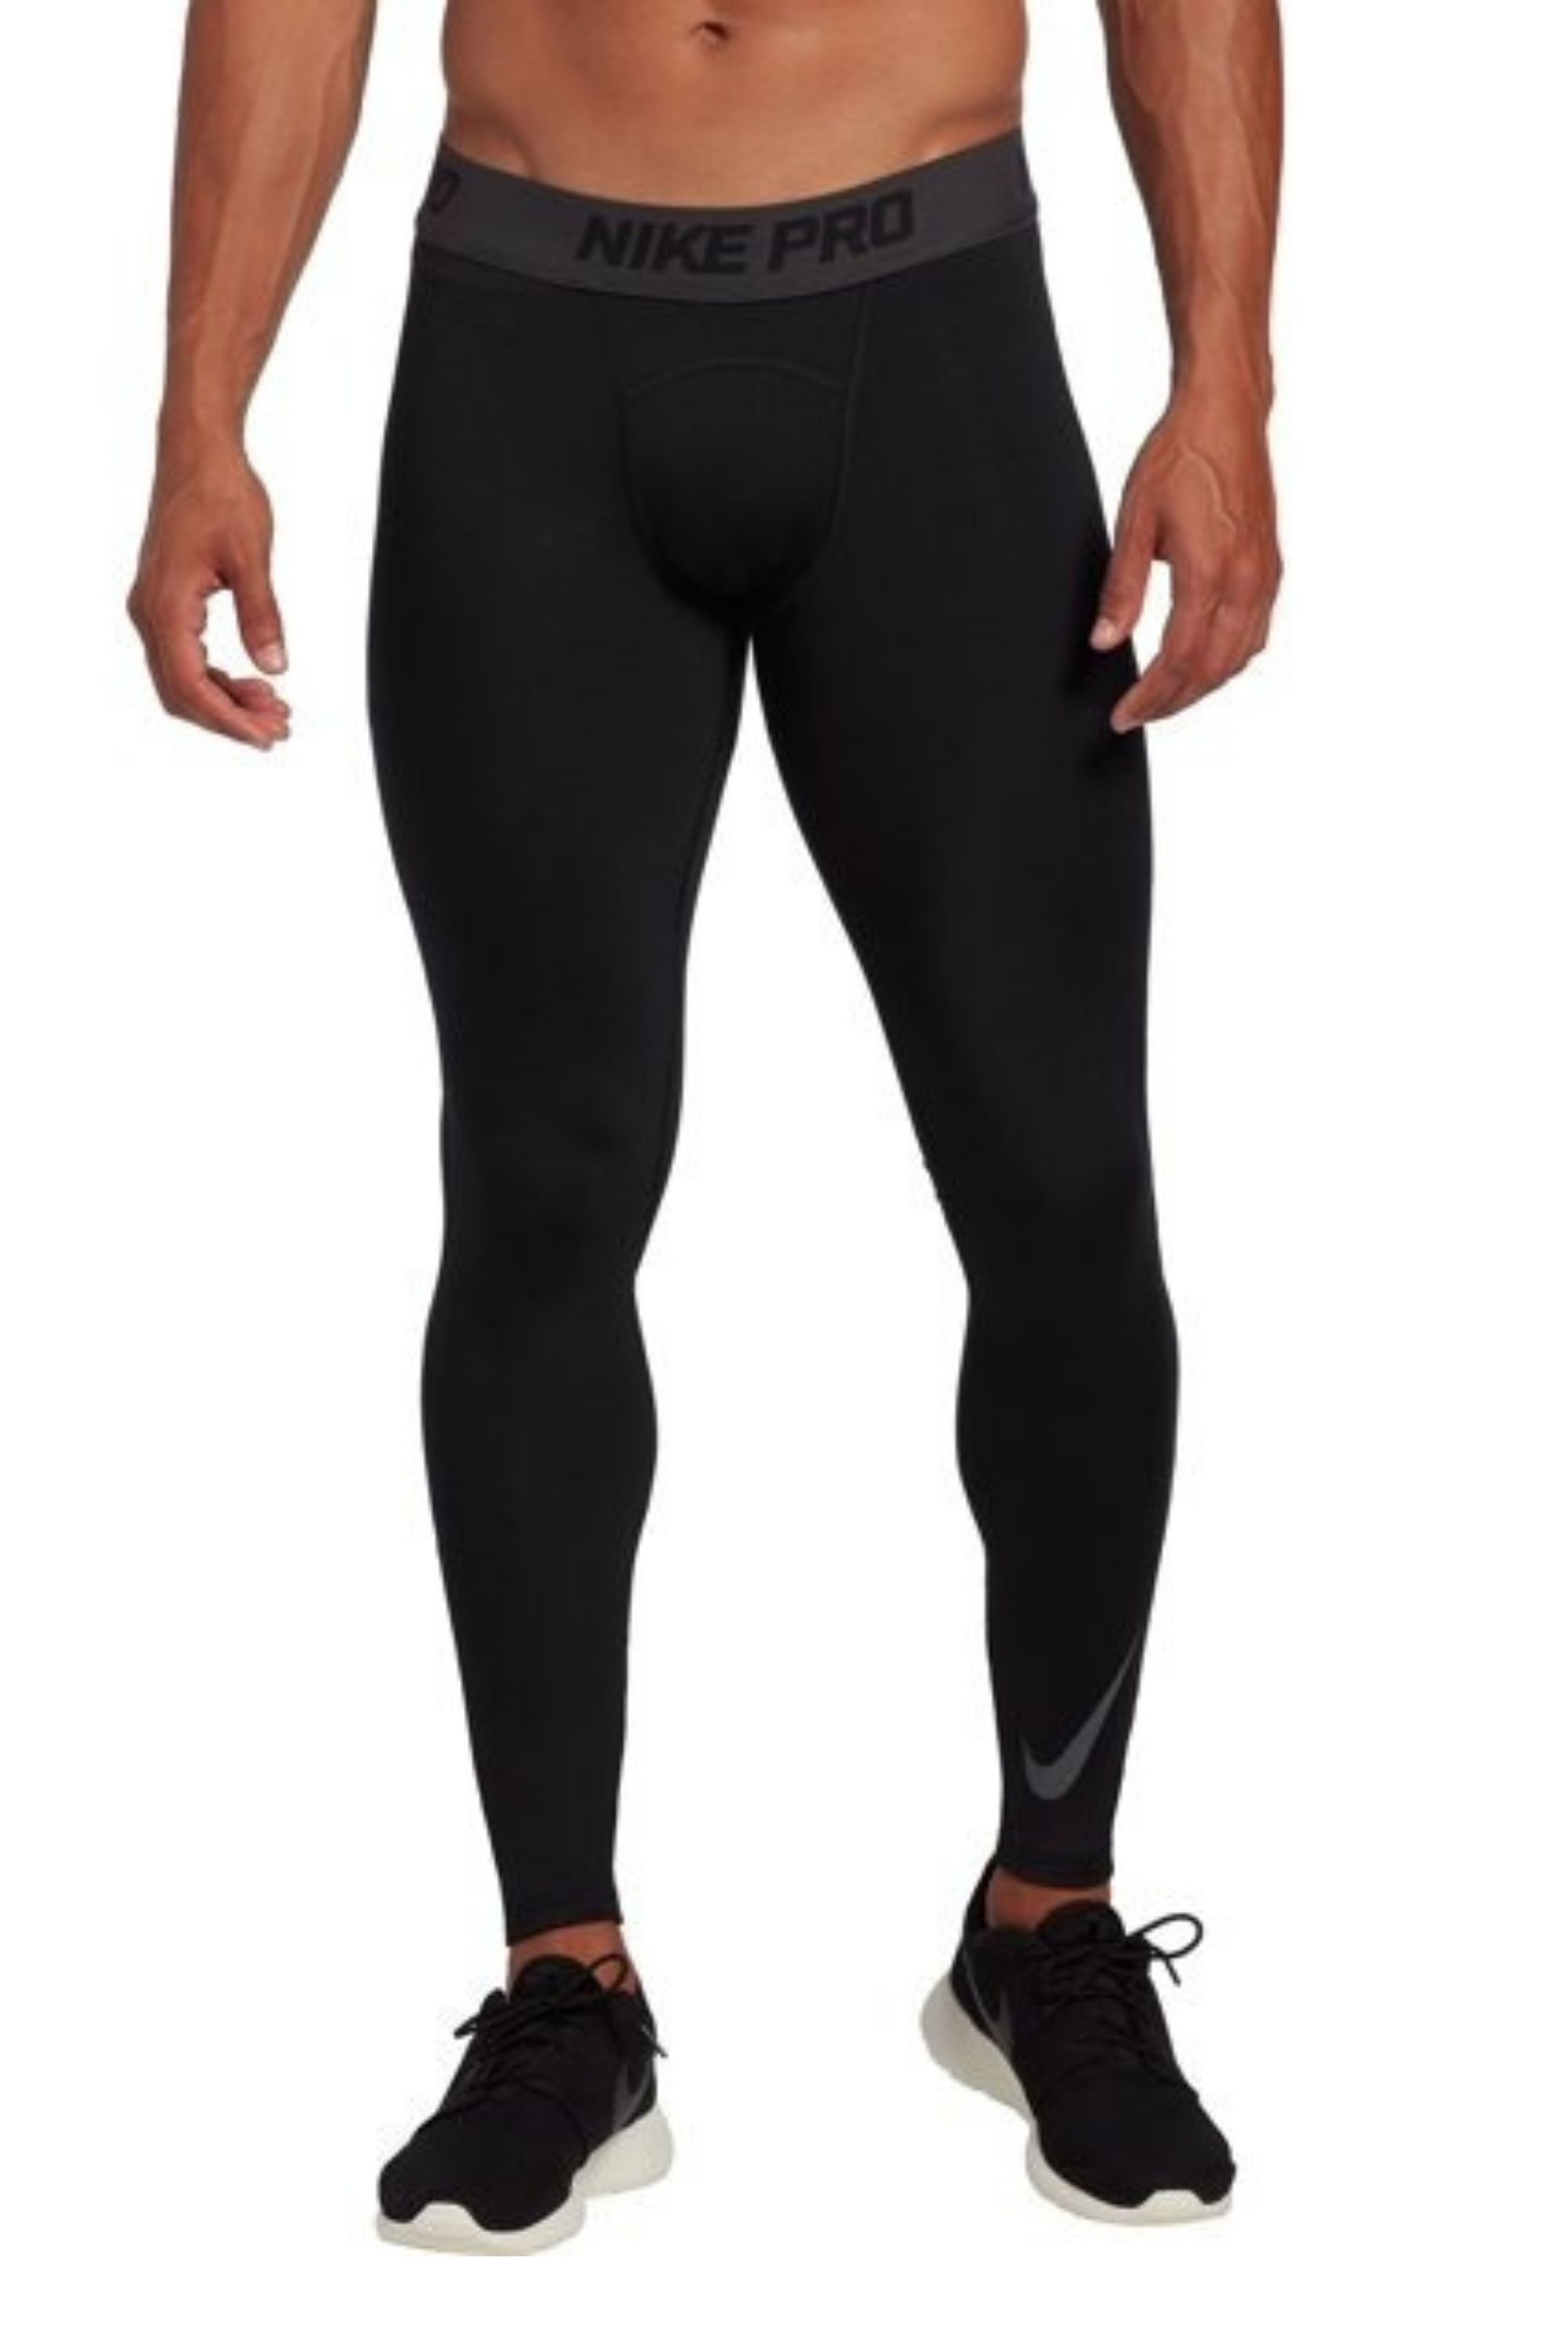 Mens Compression Thermal Leggings Tight Under Base Layer Jogging Workout Trouser 